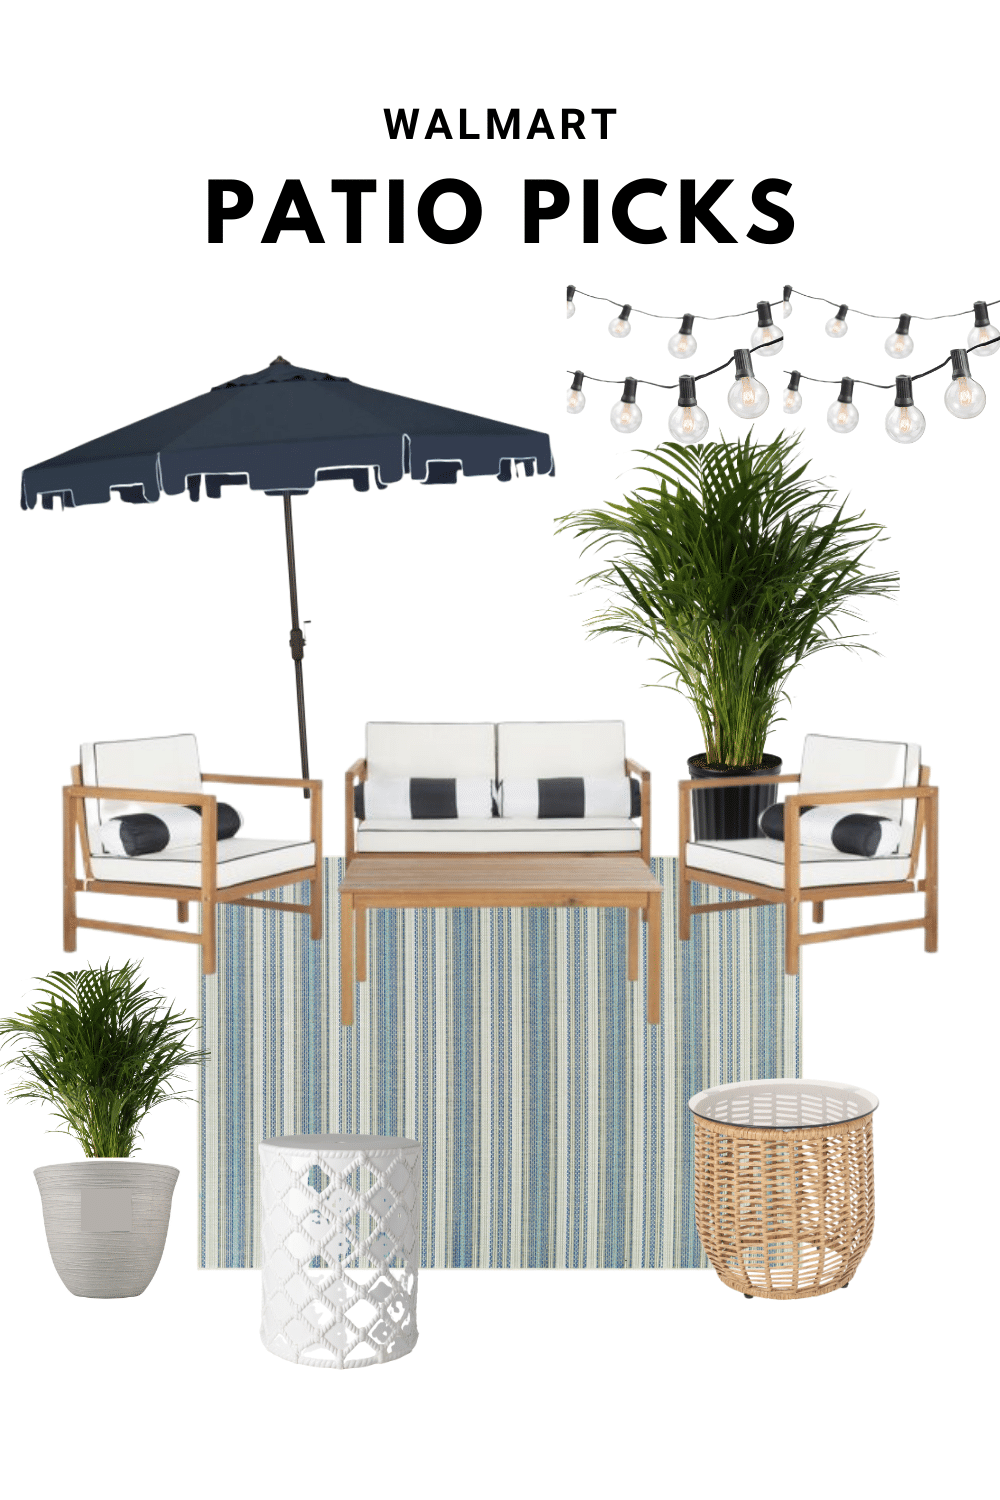 Top Outdoor Picks from Walmart for Patio